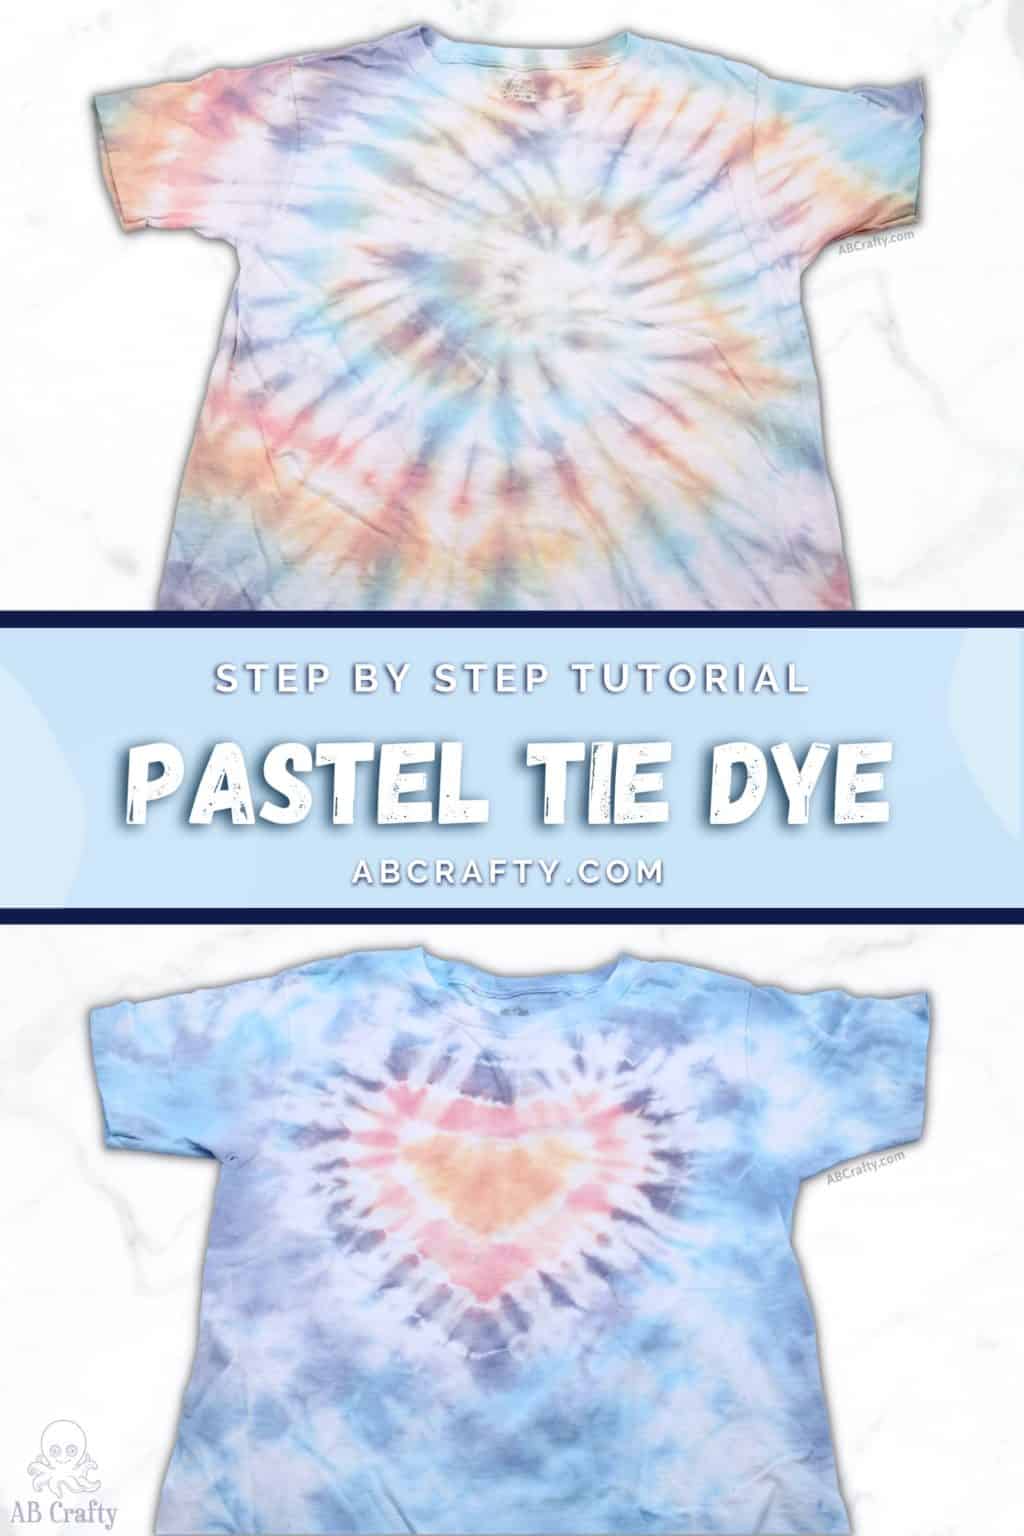 two pastel tie dye shirts - one with a rainbow spiral design and the other with a heart tie dye design. The title reads: step by step tutorial, pastel tie dye - abcrafty.com